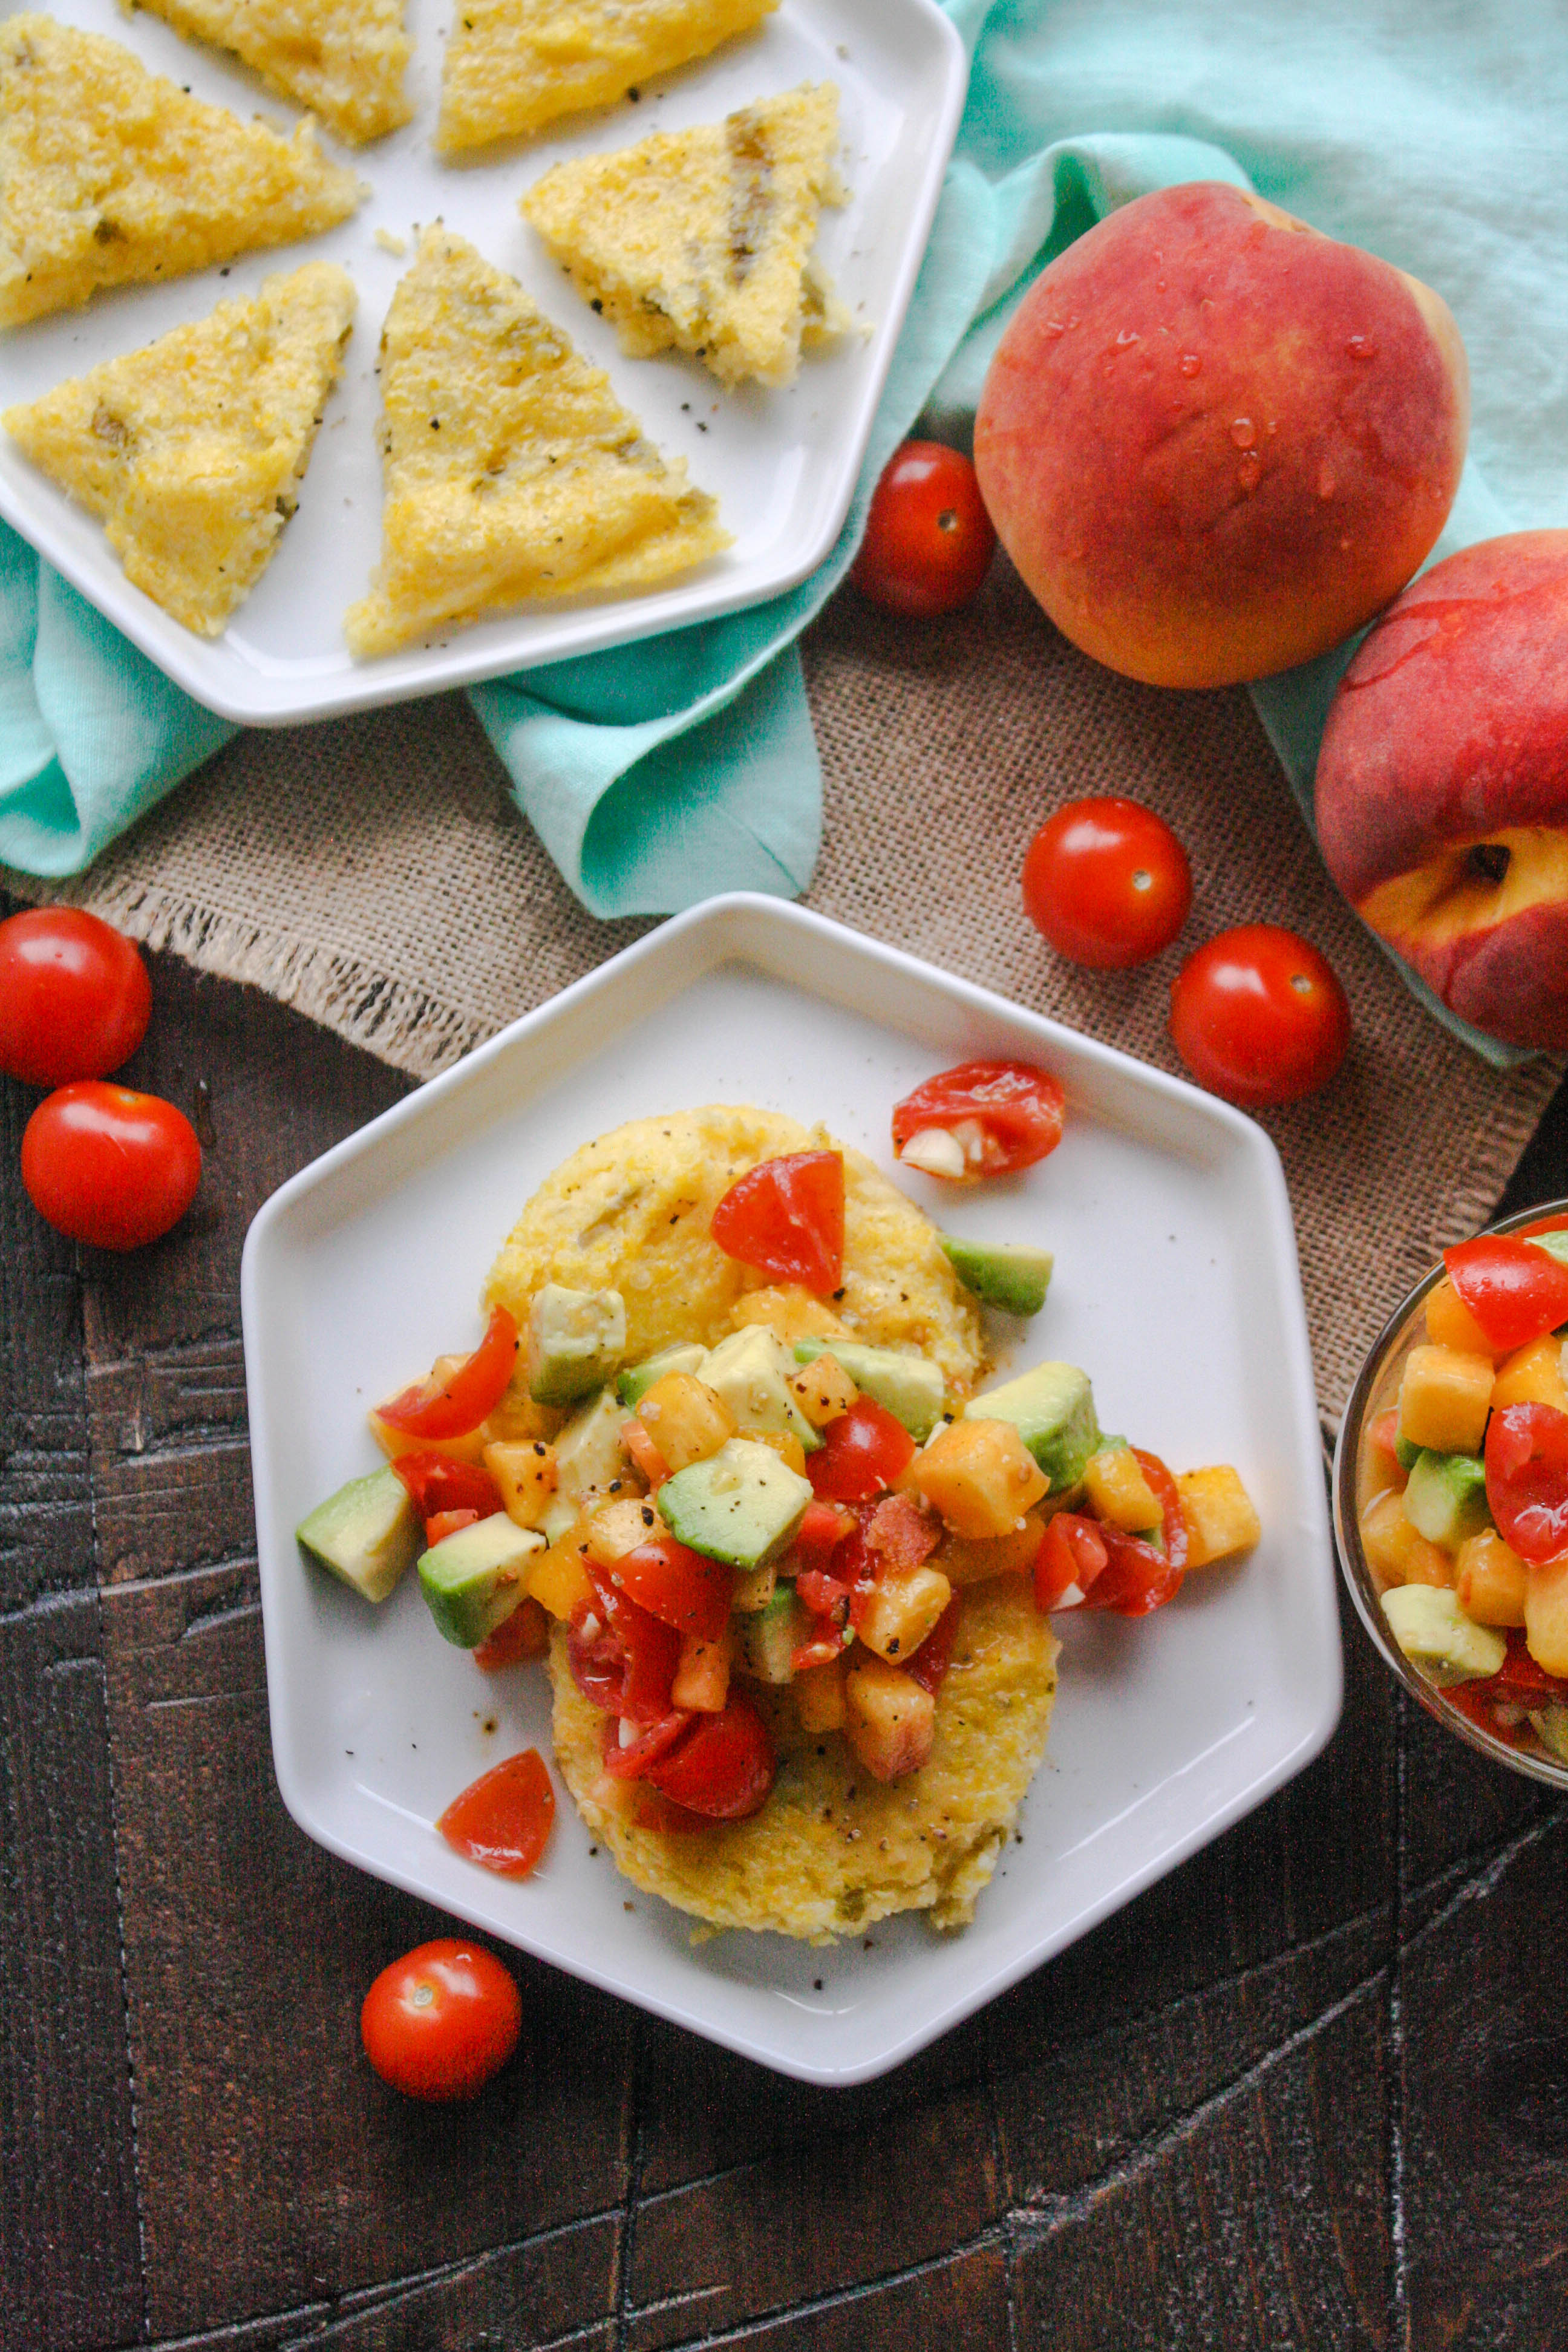 Hatch Chile Grits Cakes with Peach-Citrus Salsa is an amazing appetizer, or try it as part of a light meal. You'll love these Hatch Chile Grits Cakes with Peach-Citrus Salsa!